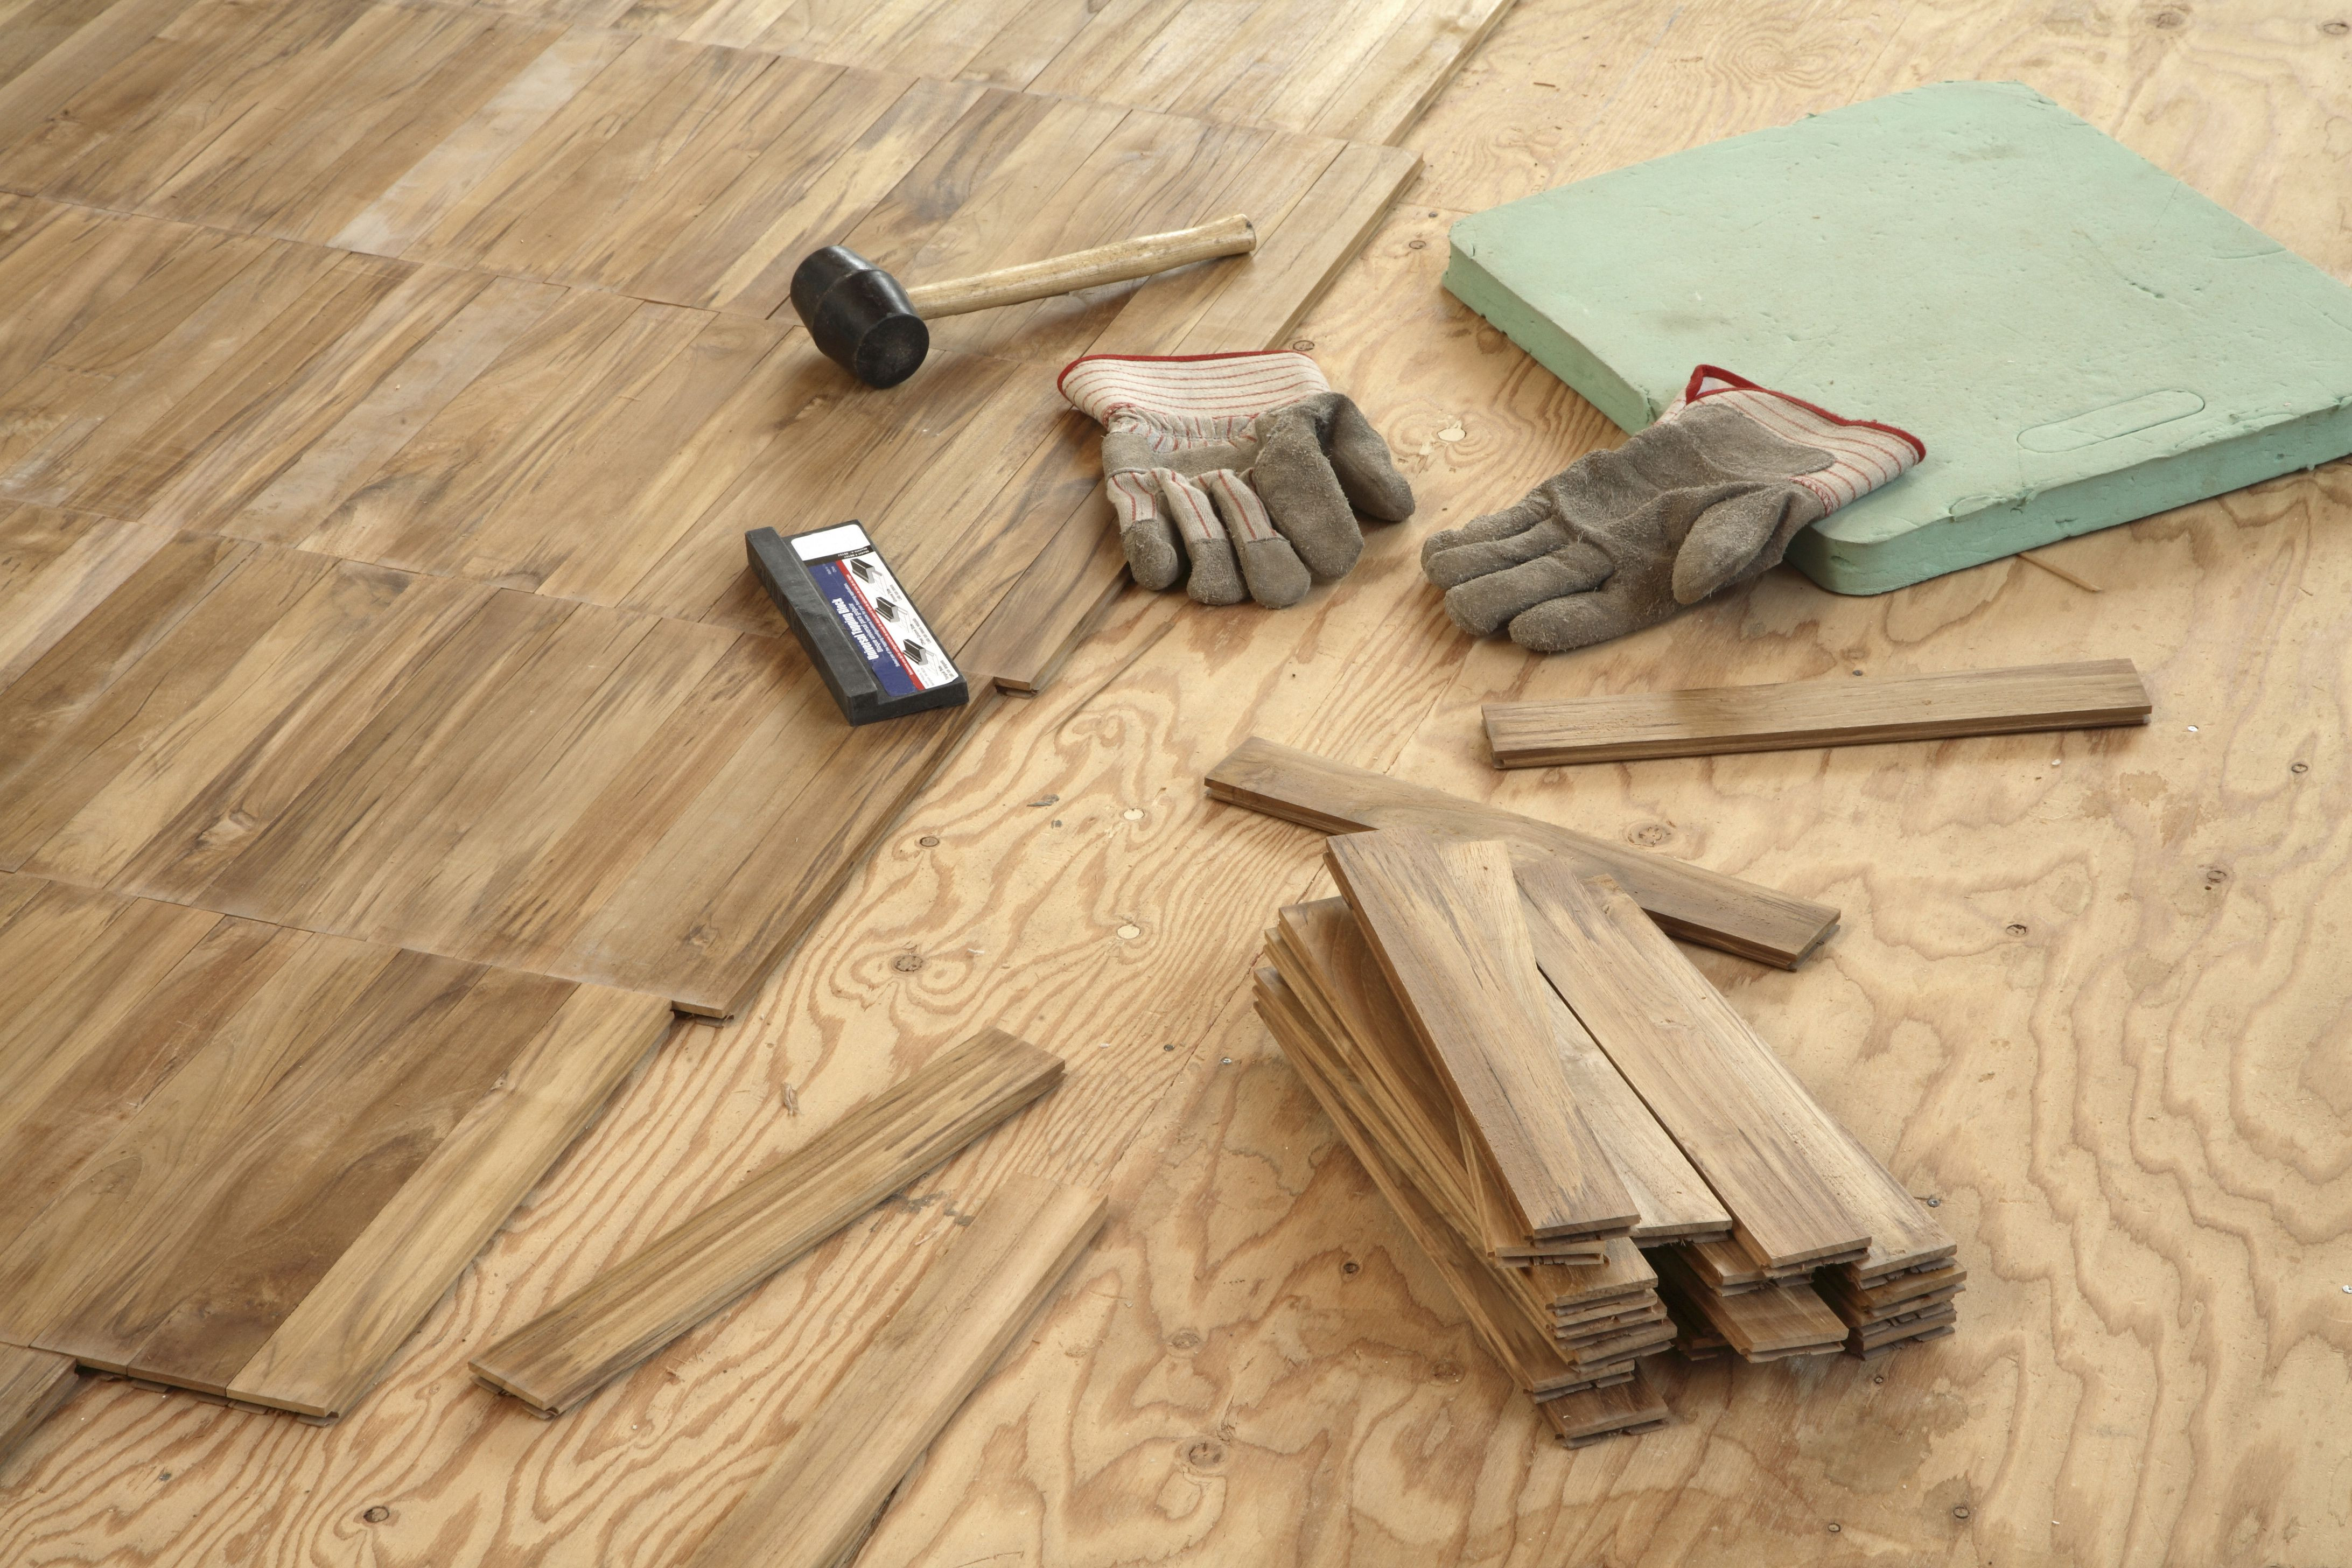 hardwood floor refinishing niagara region of plywood underlayment pros and cons types and brands within plywoodunderlaymentunderwoodflooring 5ac24fbcae9ab8003781af25